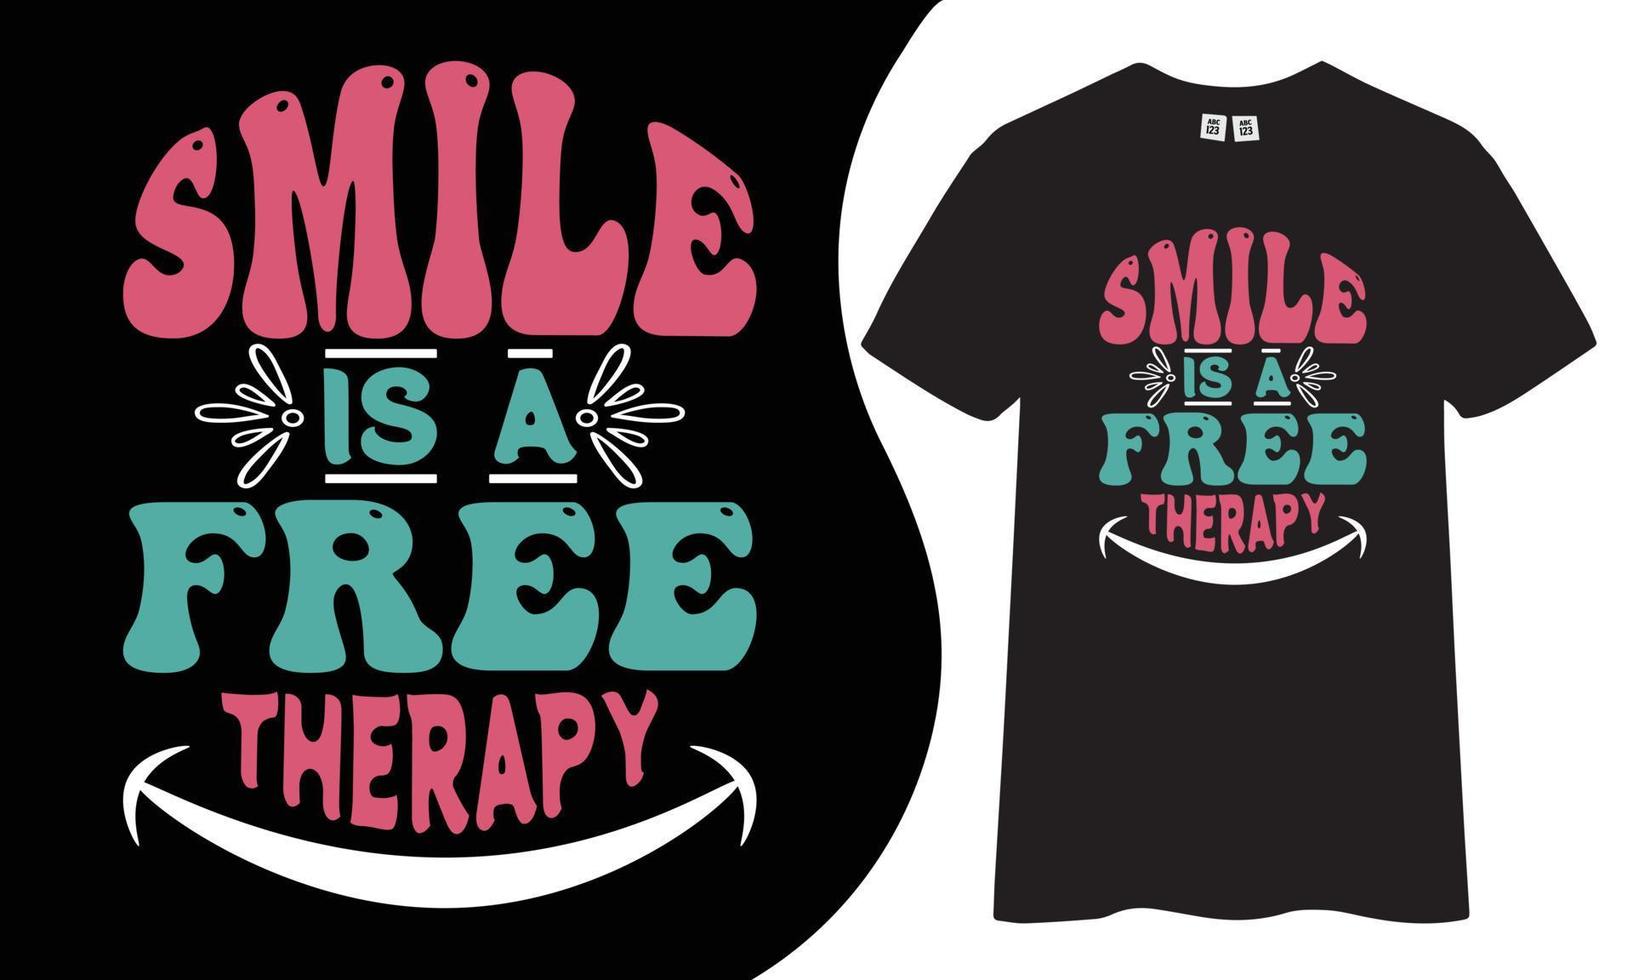 Smile is a free therapy motivational and inspirational t-shirt design vector